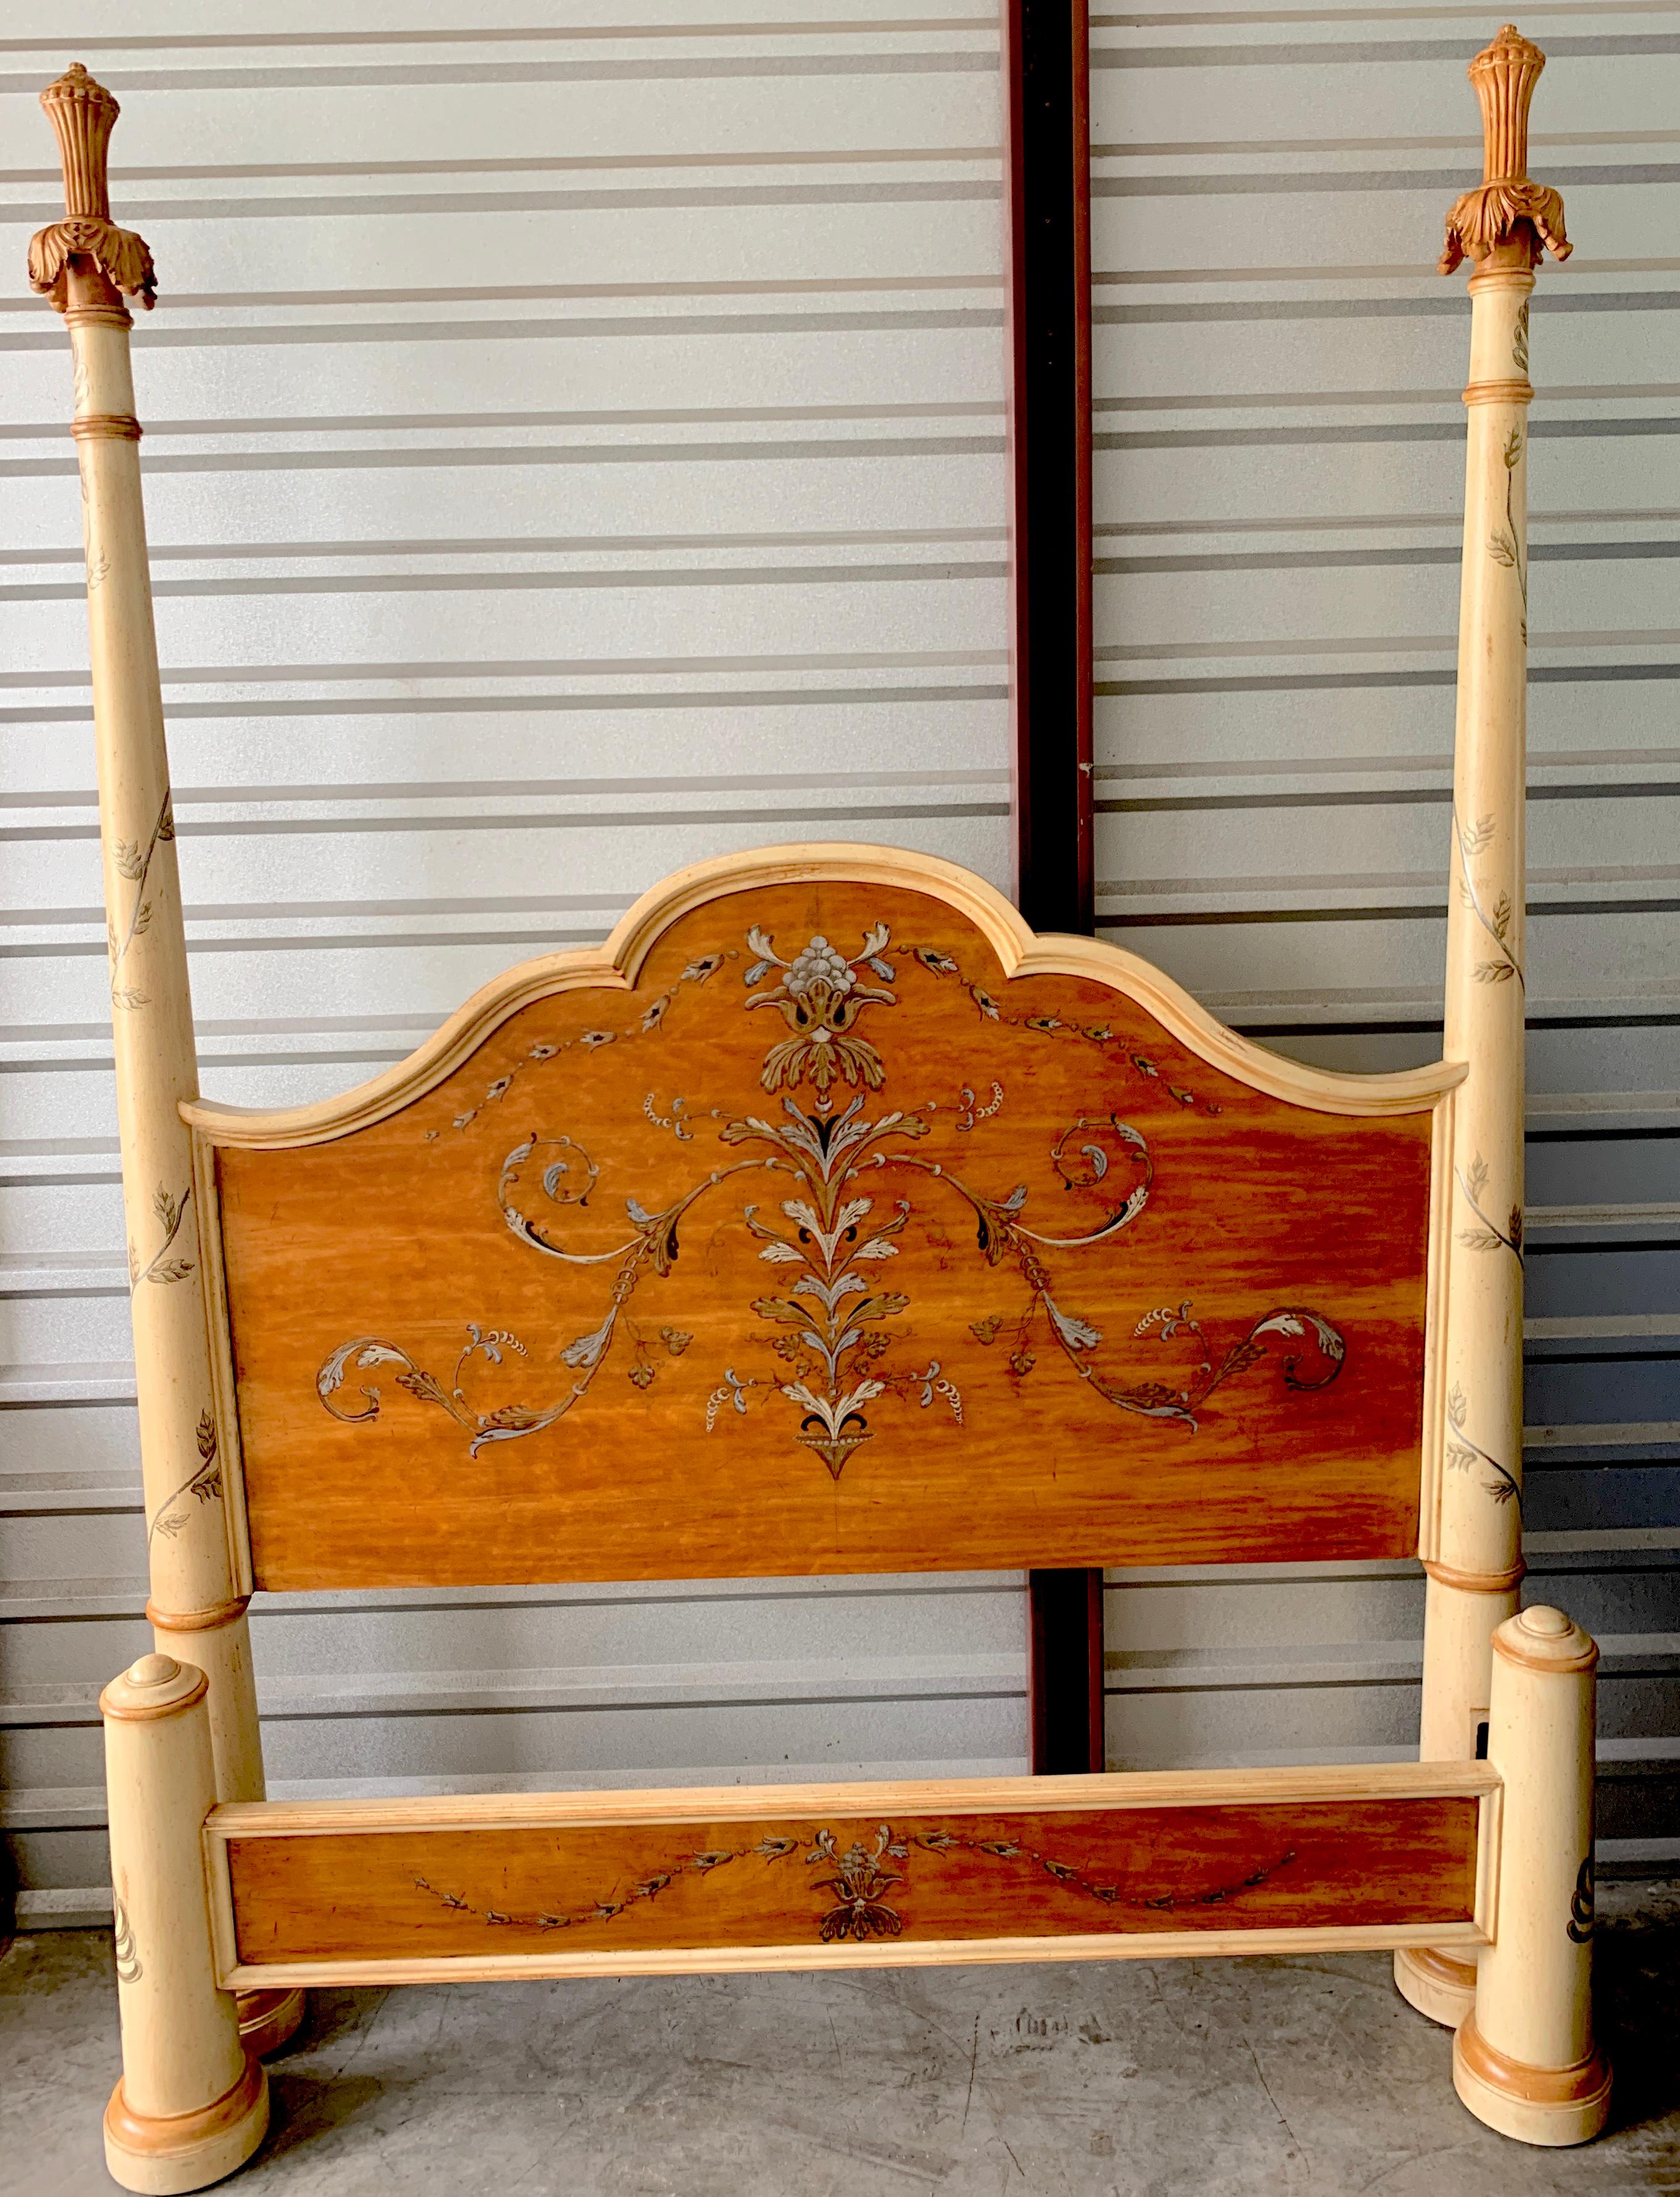 Copeland Ferguson Venetian painted queen bed, estate of Celine Dion
Nicer than most, with twin tall posts at the headboard and lower footboard, complete with side rails.
Measures: 93